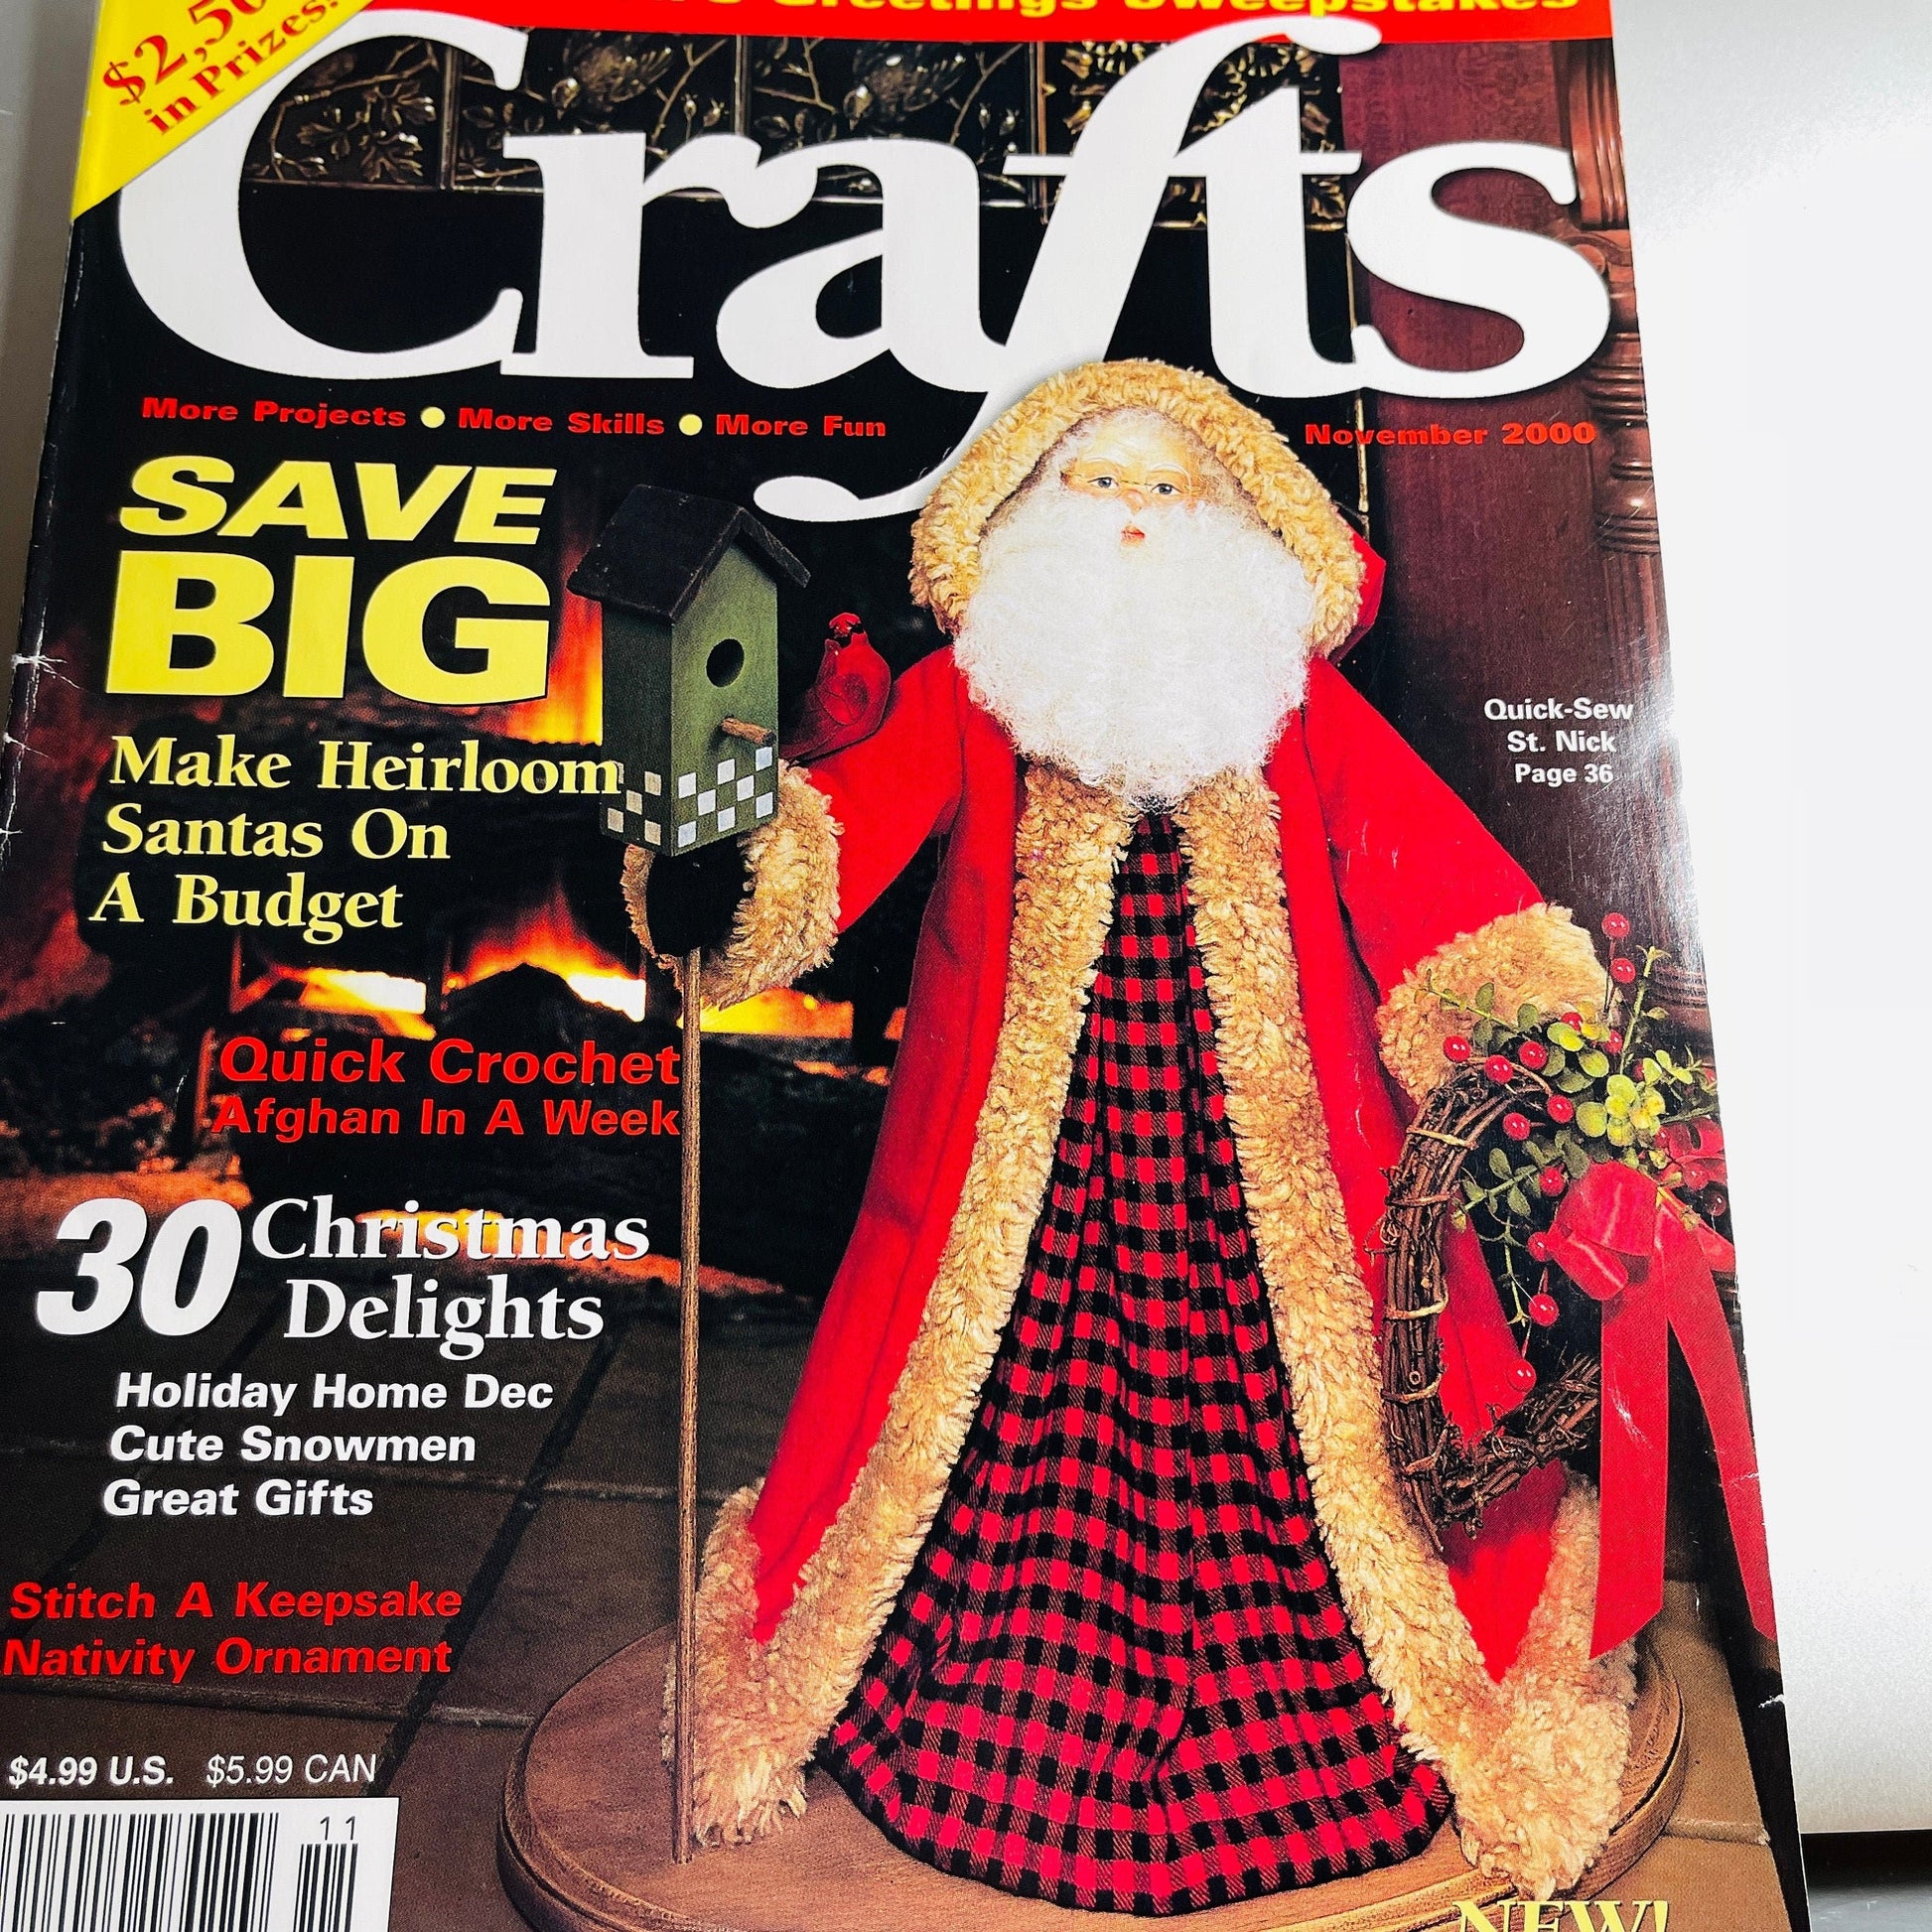 Crafts Magazine, November 2000 Issue with 30 Christmas Delights